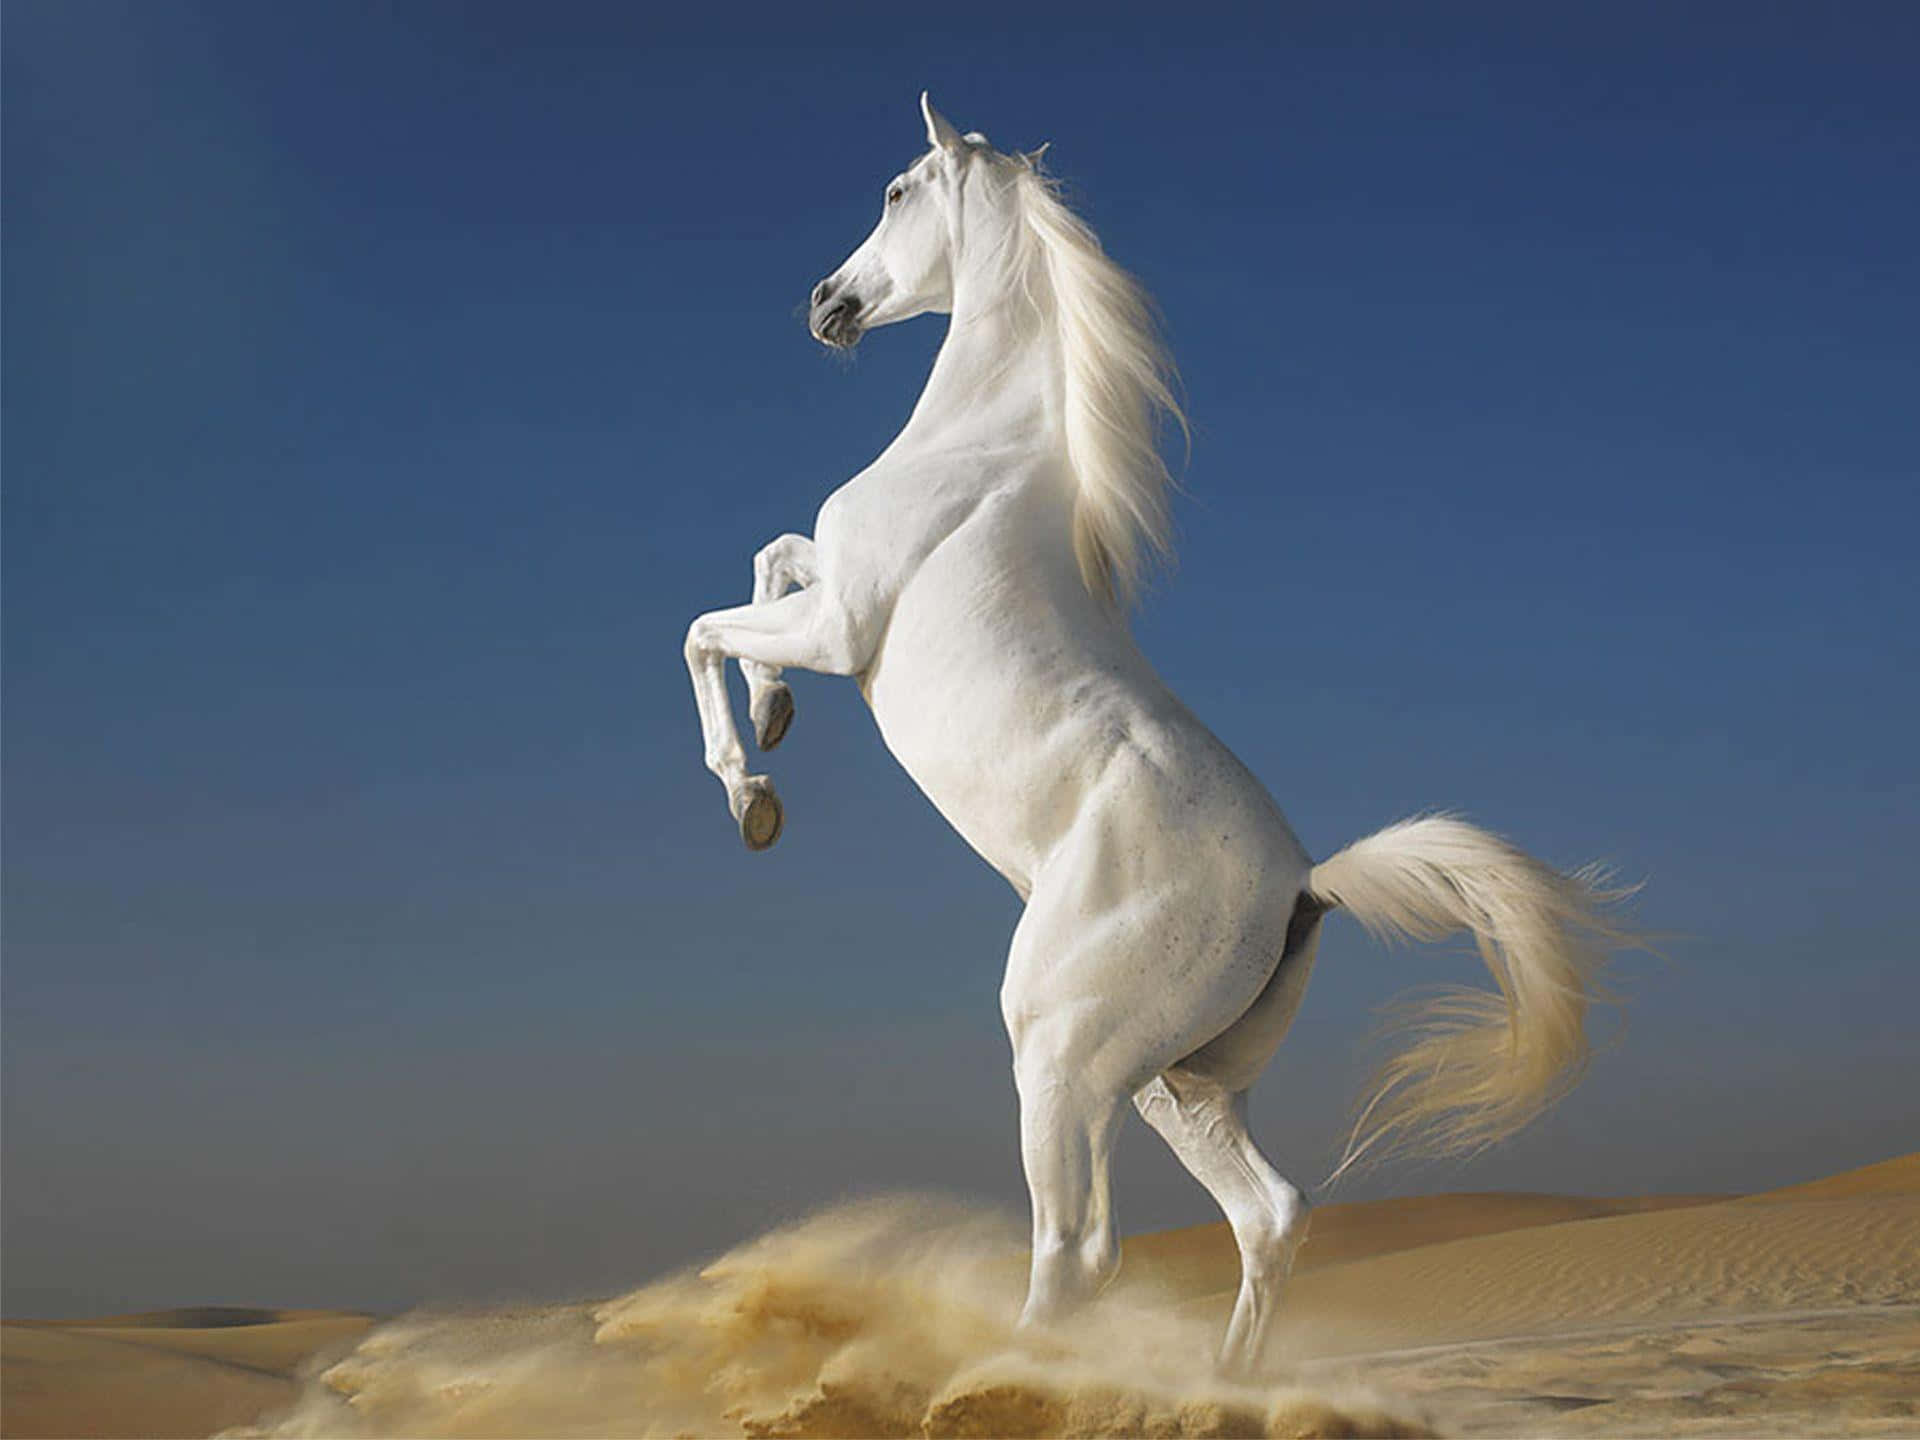 Majestic White Horse Galloping Through Snowy Field.